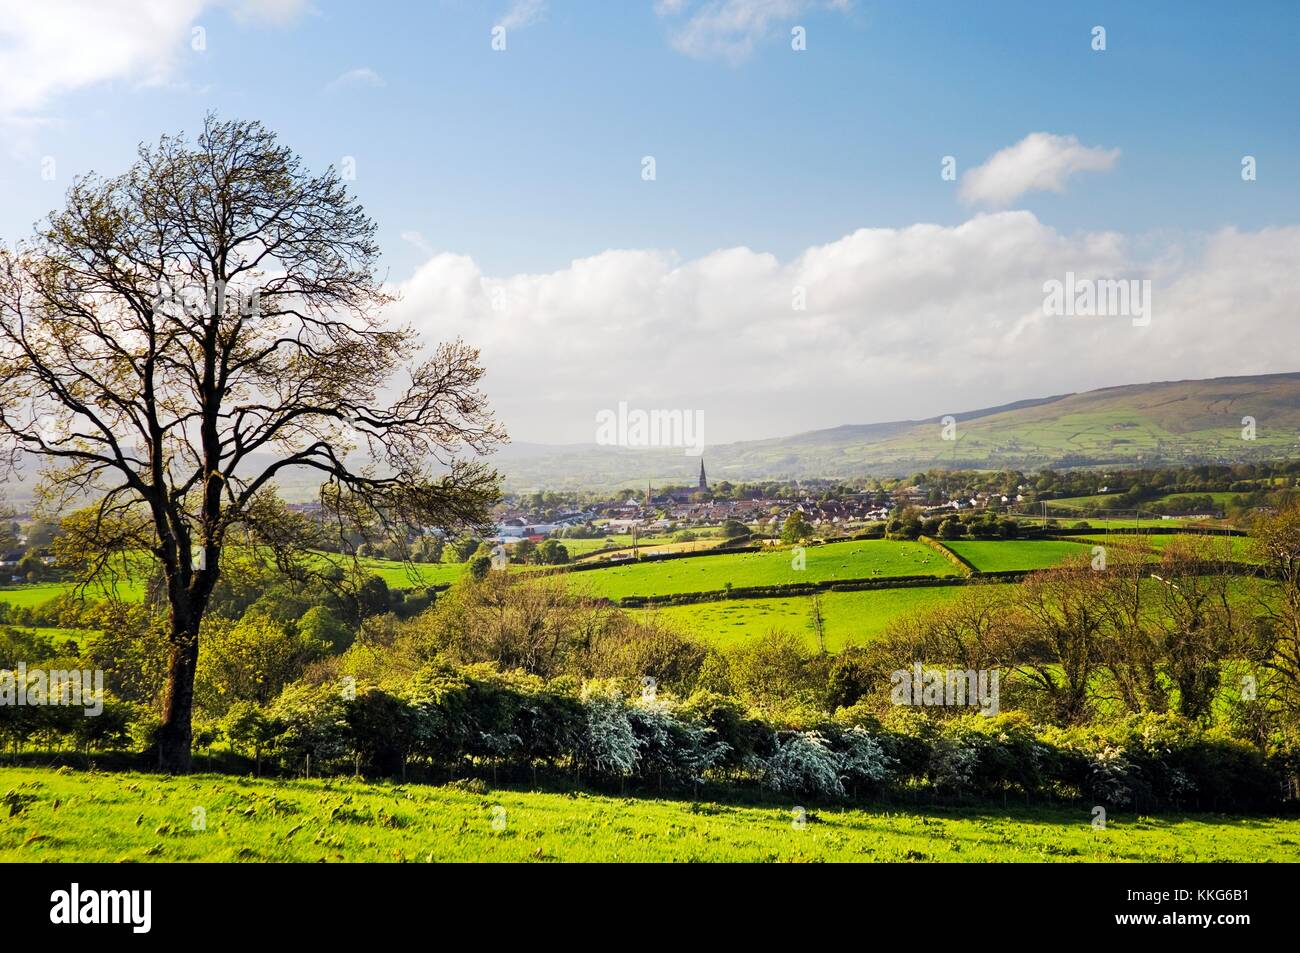 N.W. to the slopes of Slieve Gallion over farmland and the Plantation town of Cookstown, which dates from 1609. County Tyrone. Stock Photo